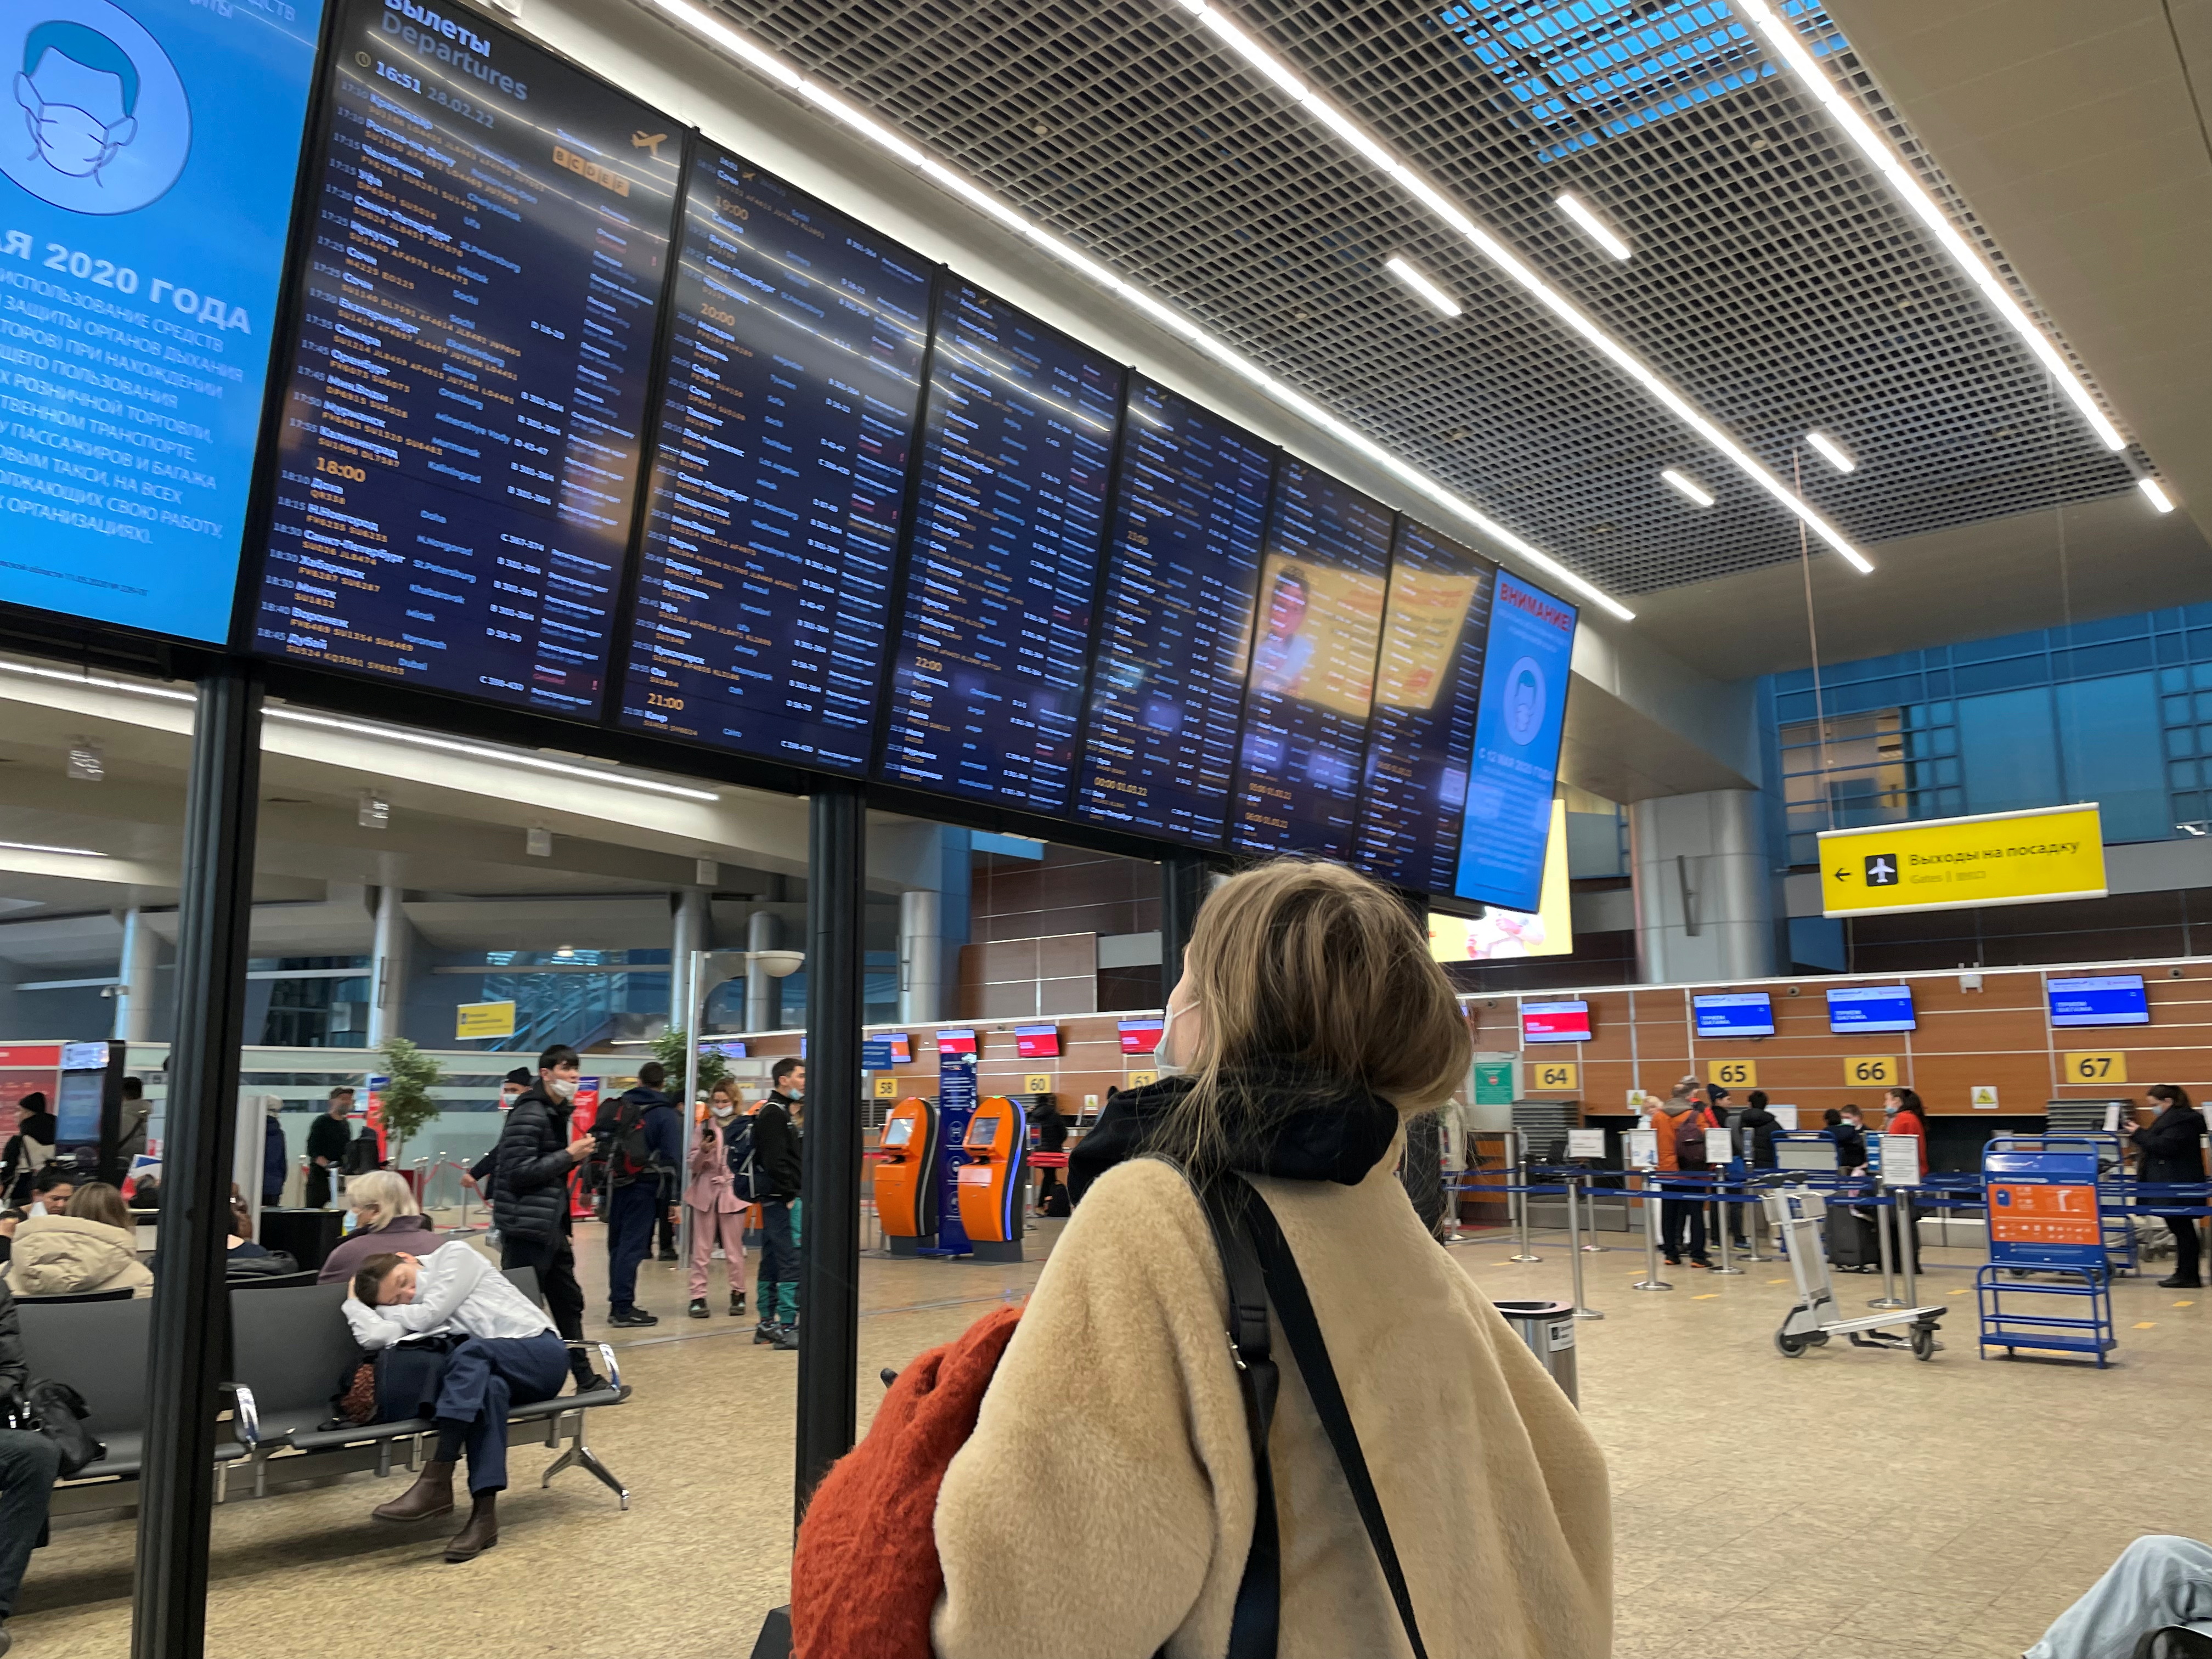 A passenger looks at a departures board at Sheremetyevo airport in Moscow